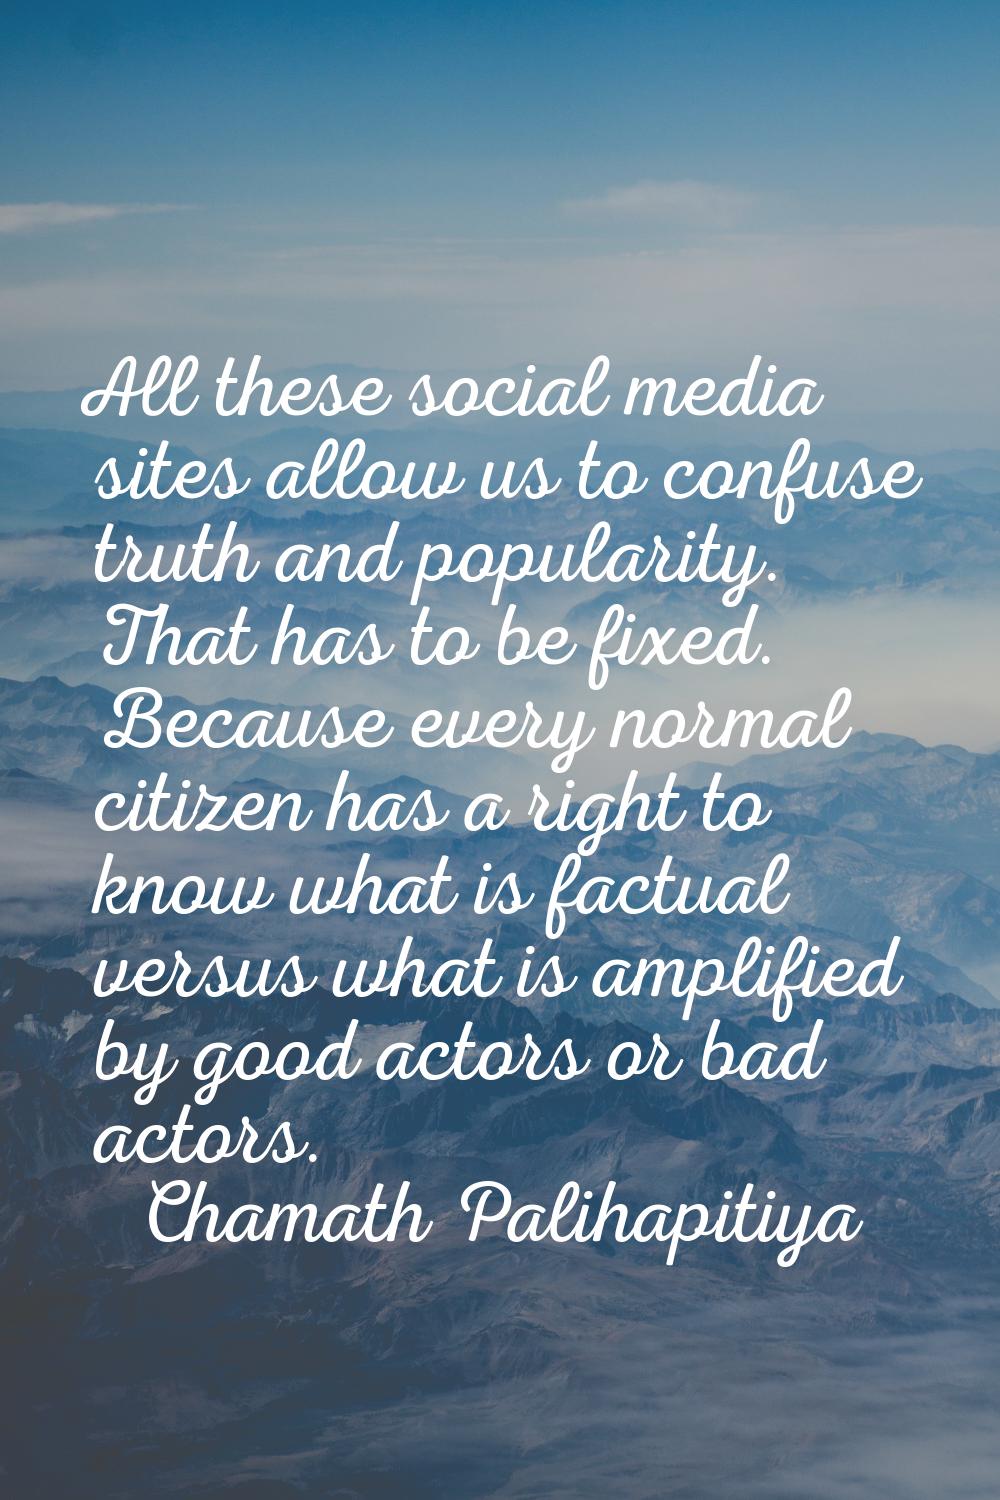 All these social media sites allow us to confuse truth and popularity. That has to be fixed. Becaus